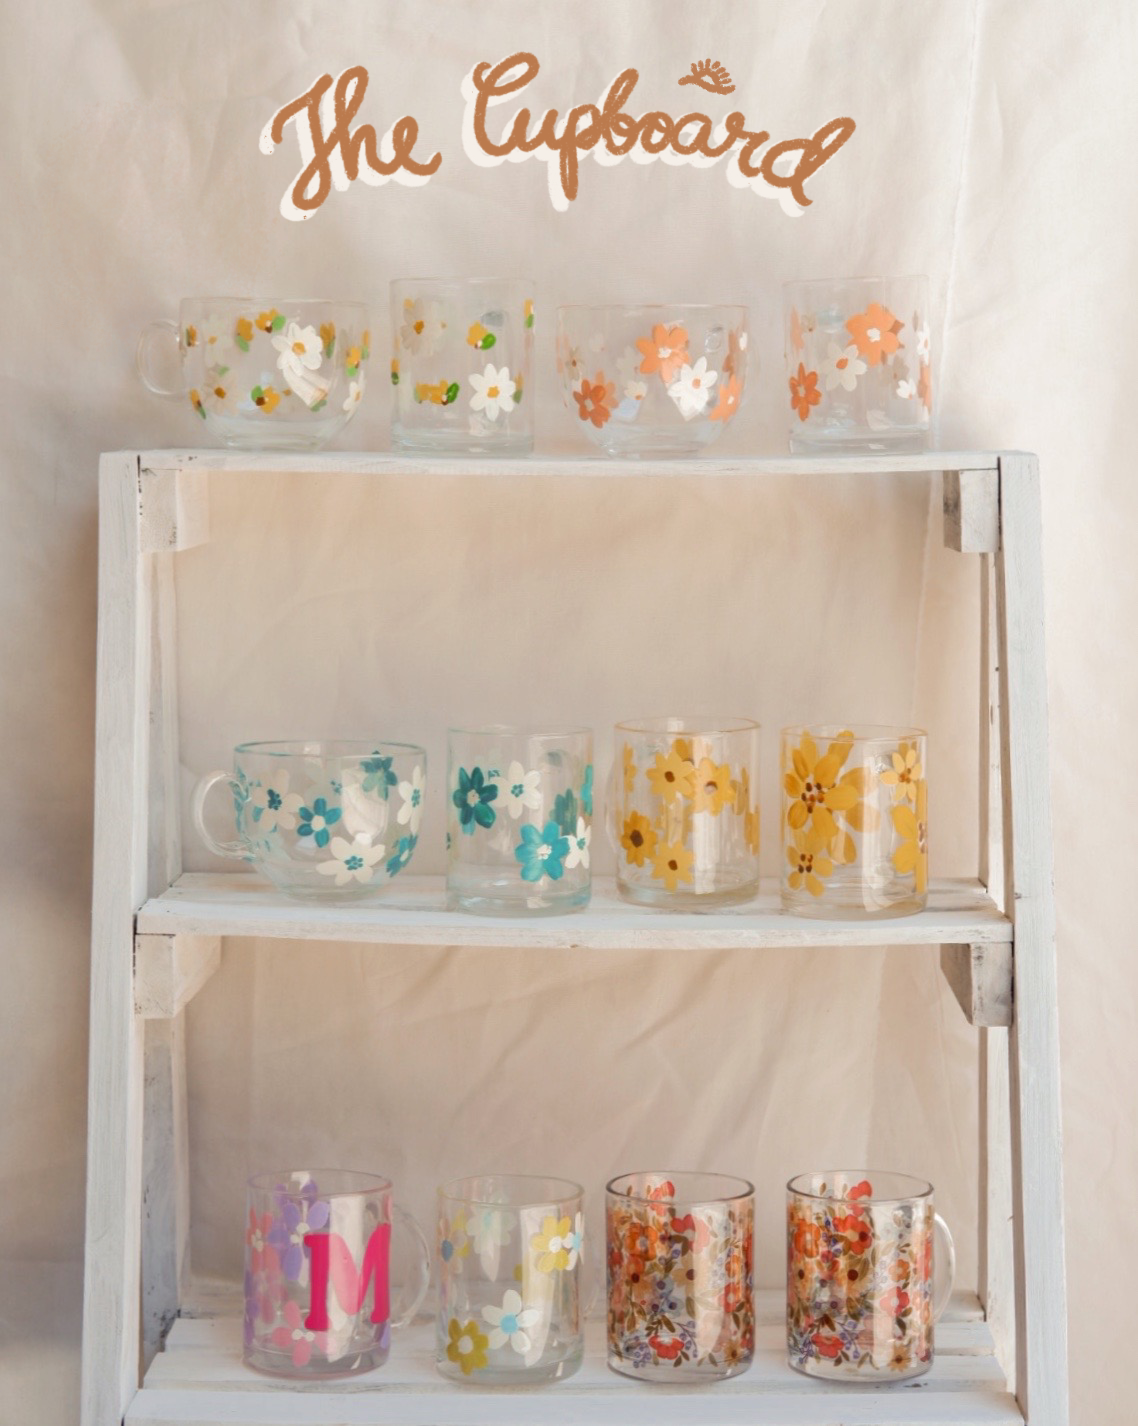 THE CUPBOARD - HANDPAINTED MUGS AND STRAW CUPS